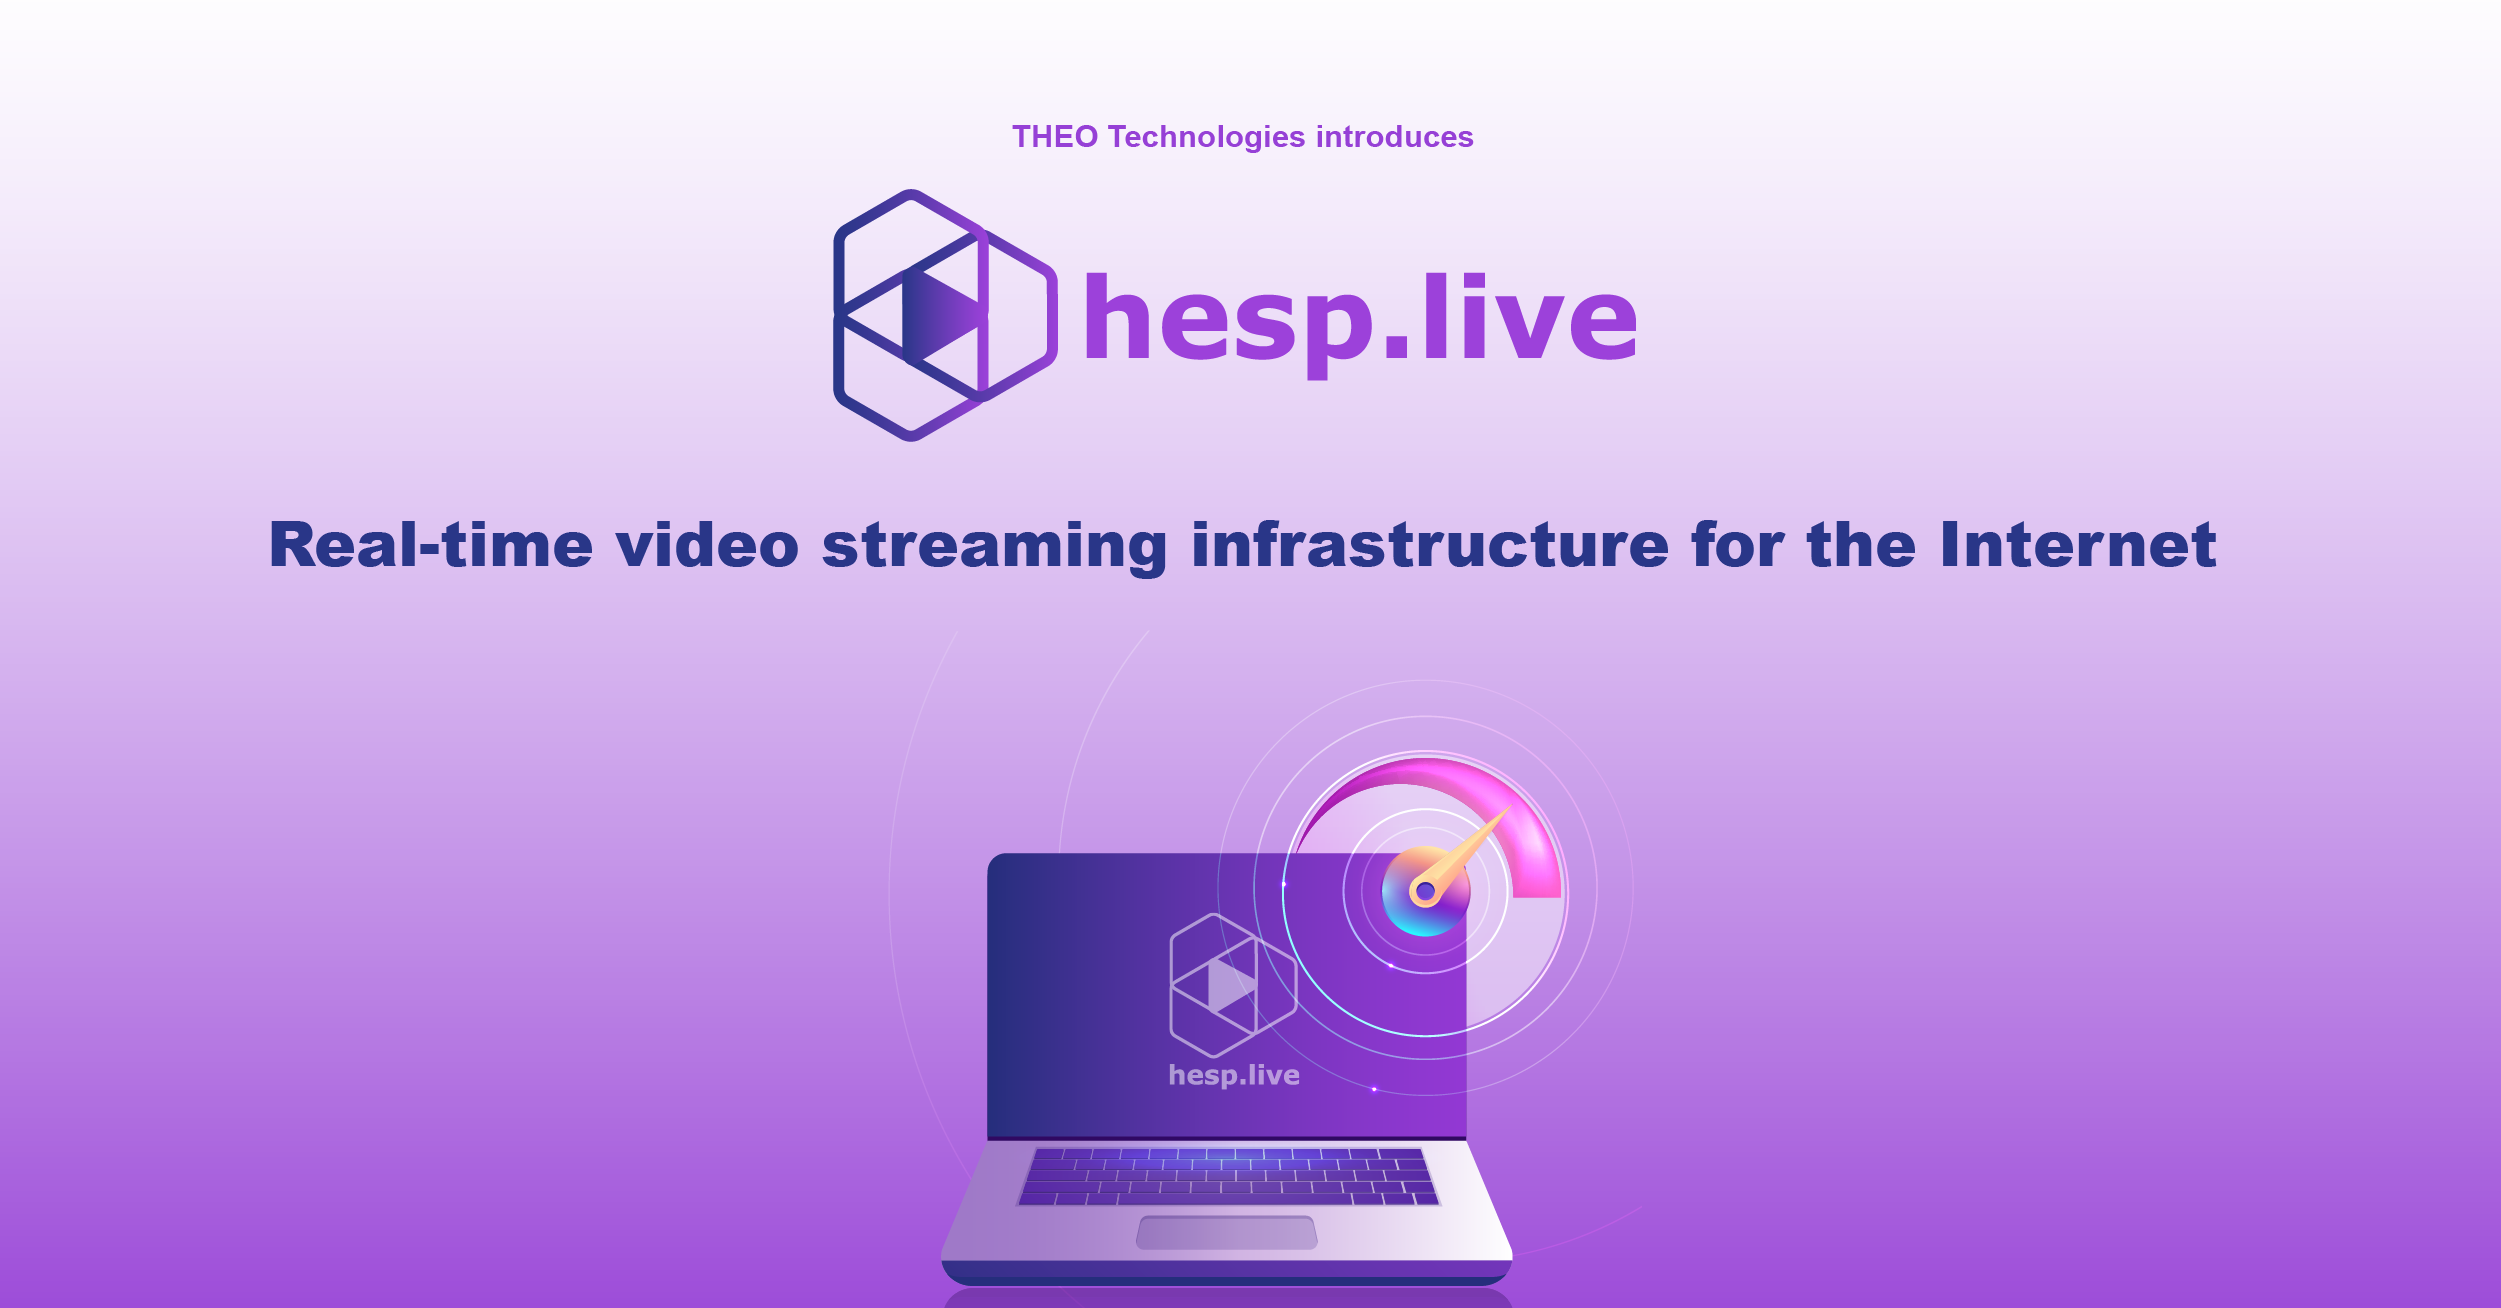 PRESS RELEASE: THEO Technologies launches hesp.live, the first HTTP-based real-time video API at scale